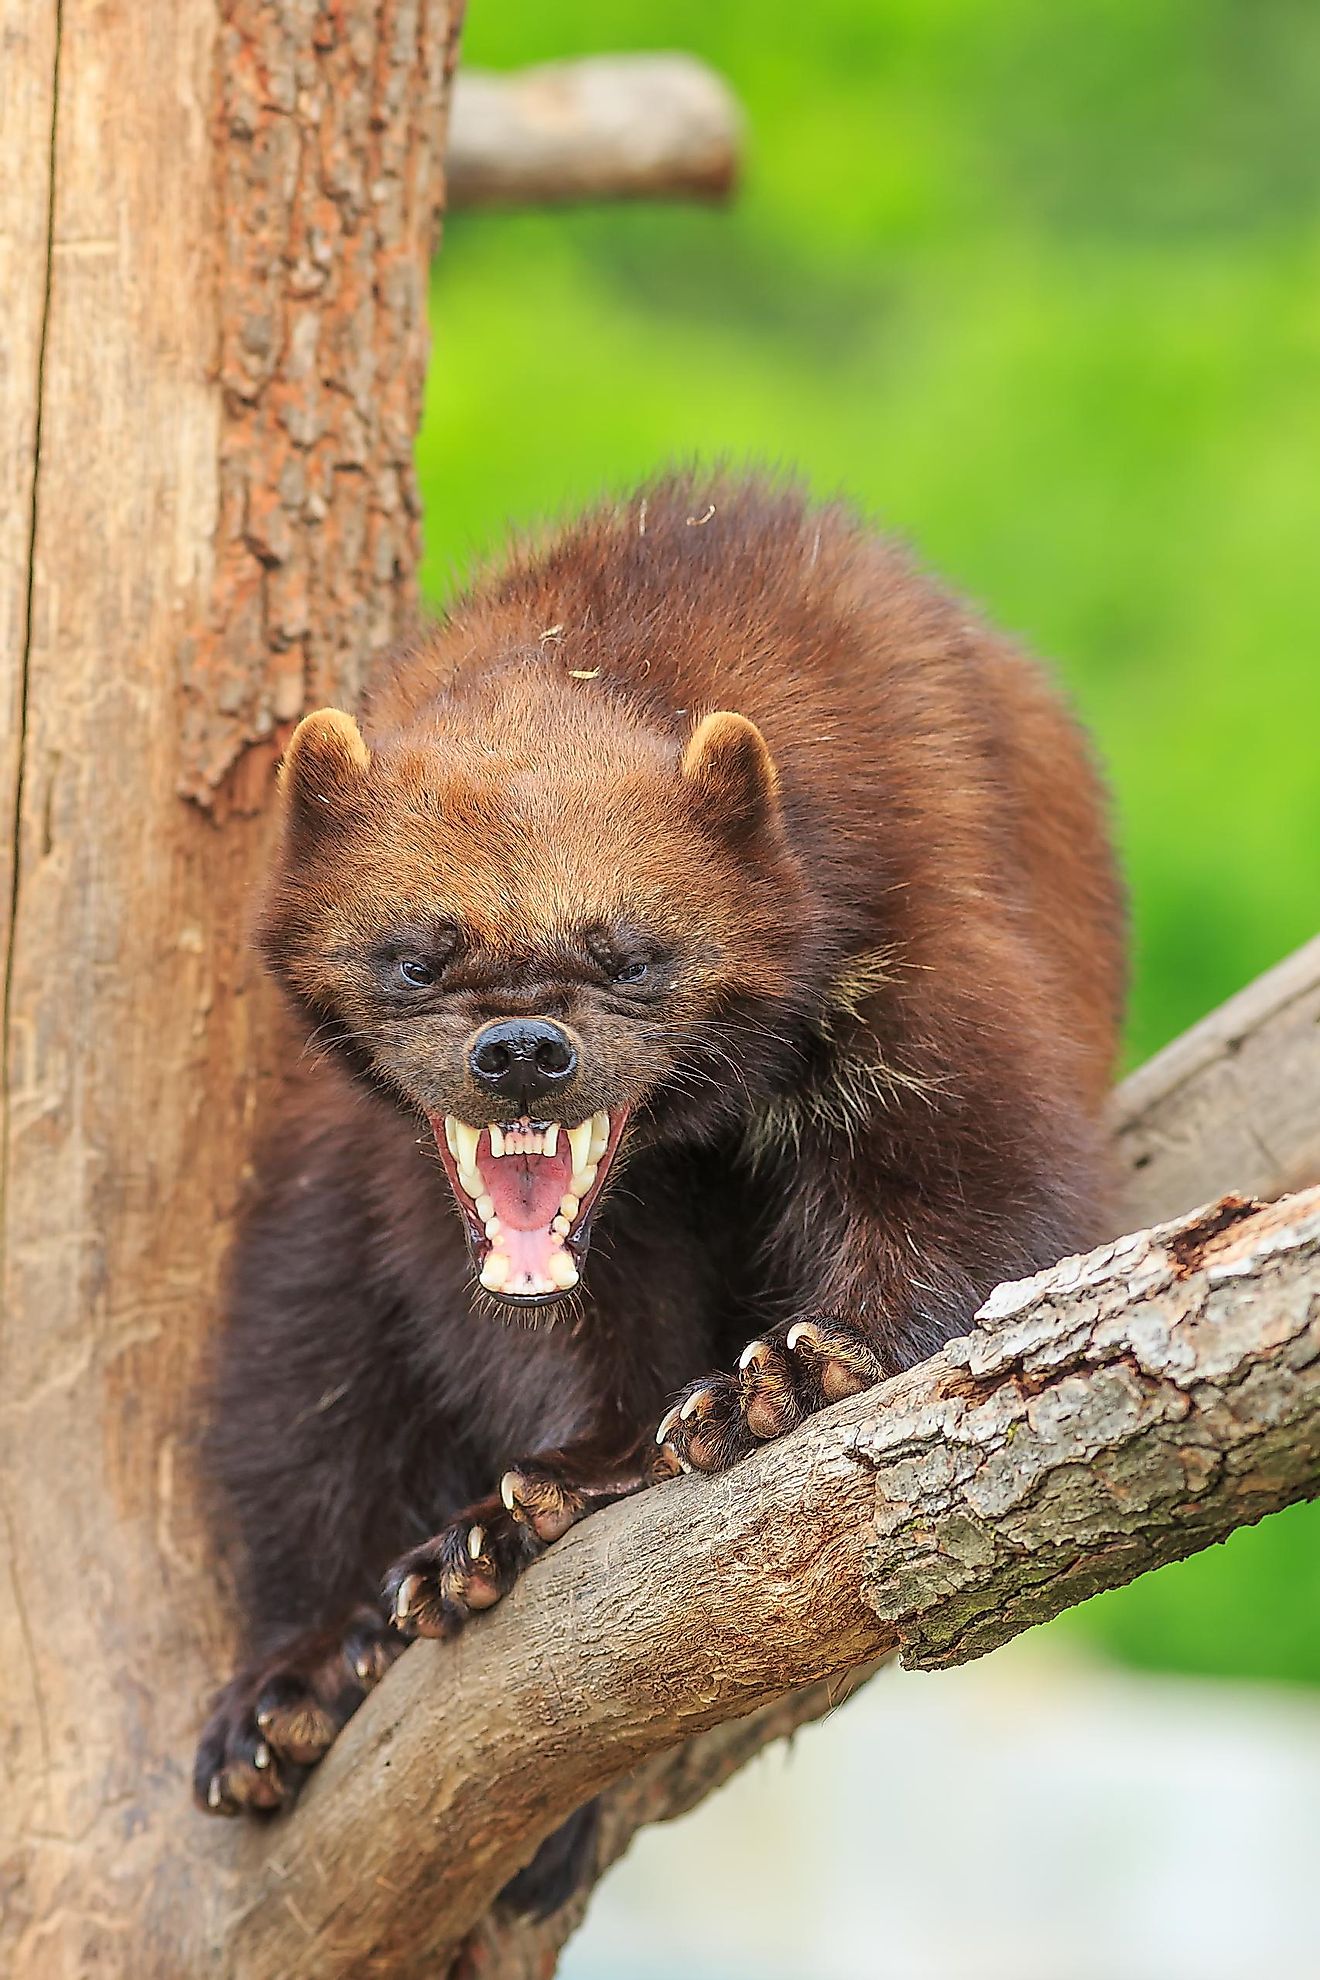 Due to its fierce appearance and agressive nature, many sports teams have adopted the Wolverine as their mascot.